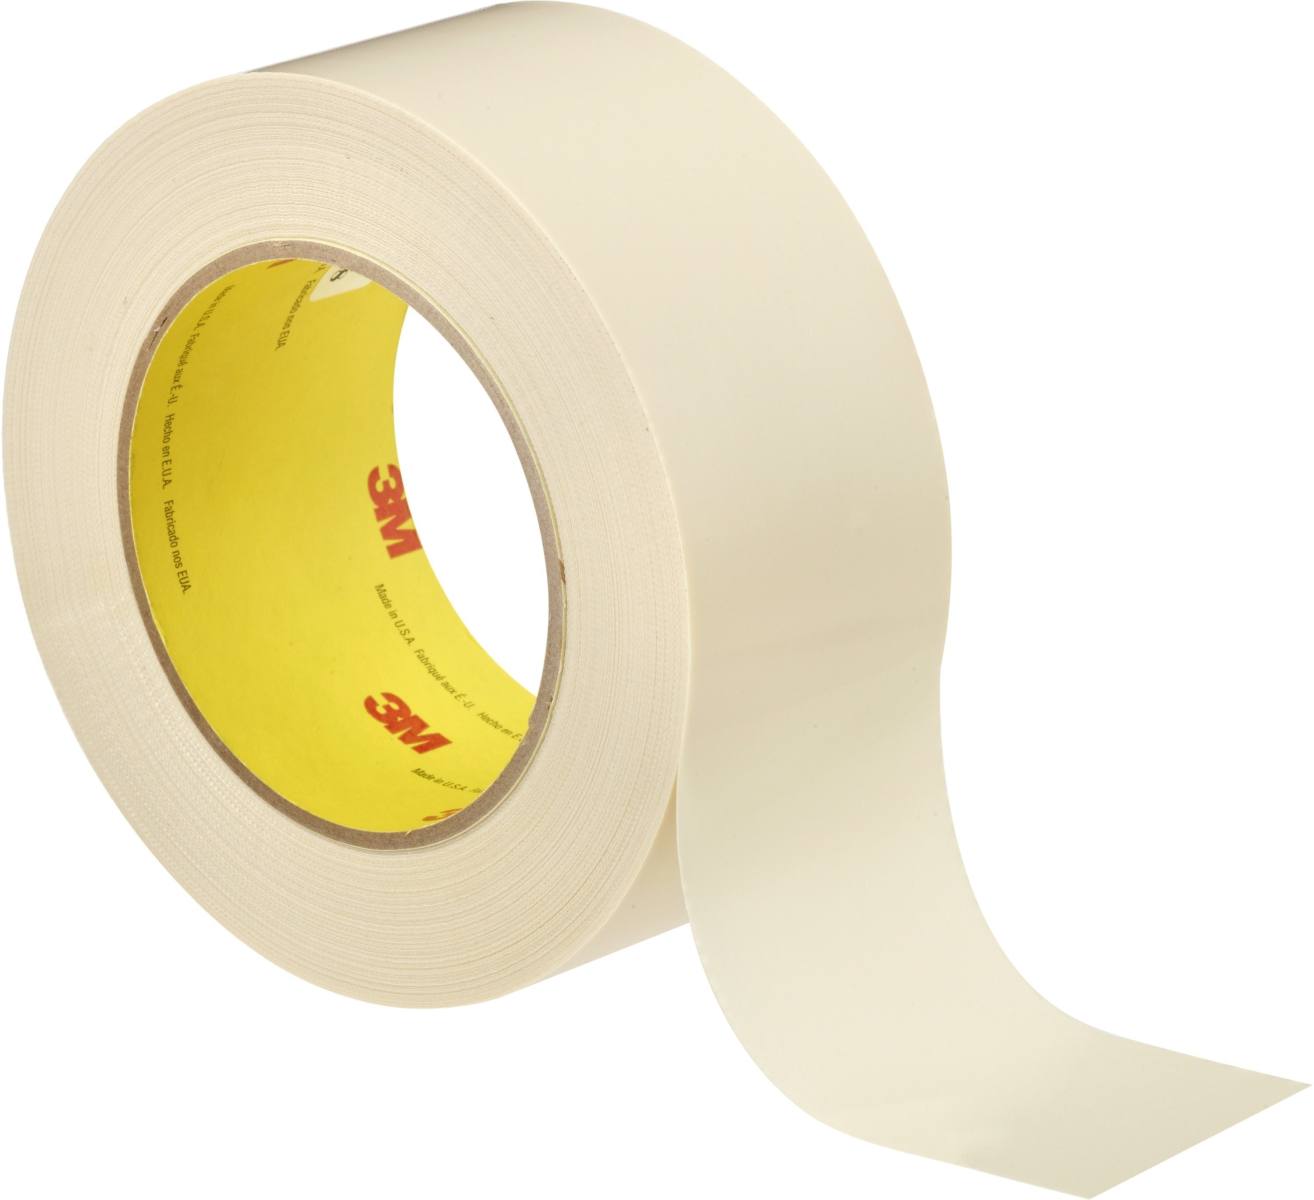 3M 5401 Traction Tape 25mmx33m